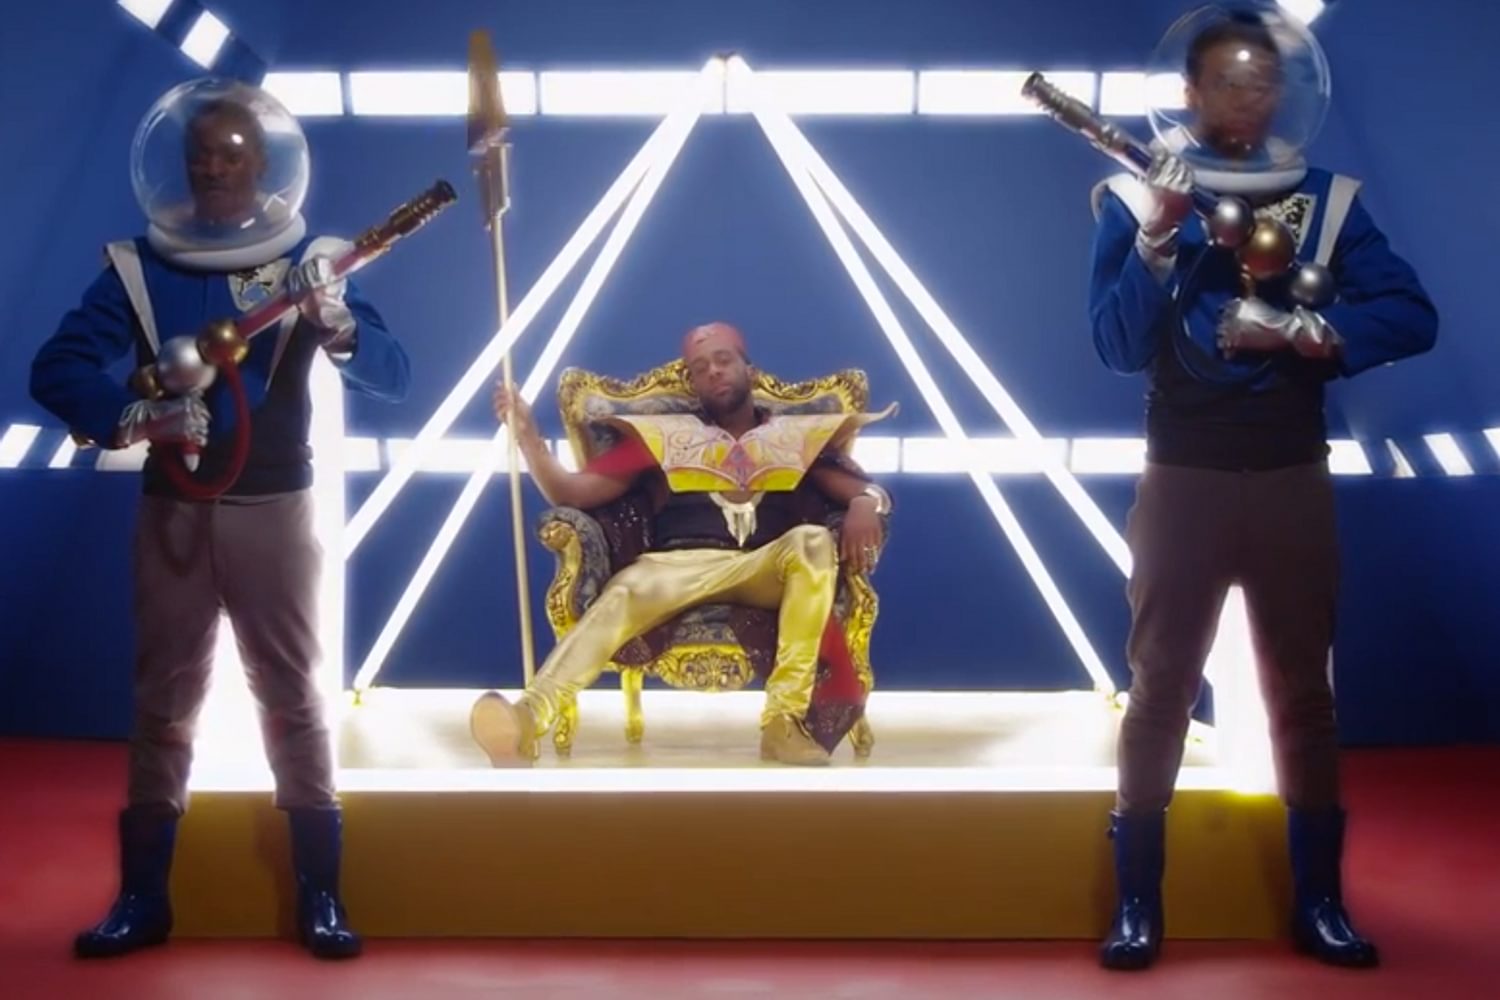 Basement Jaxx reveal spacey video for ‘Rock This Road’